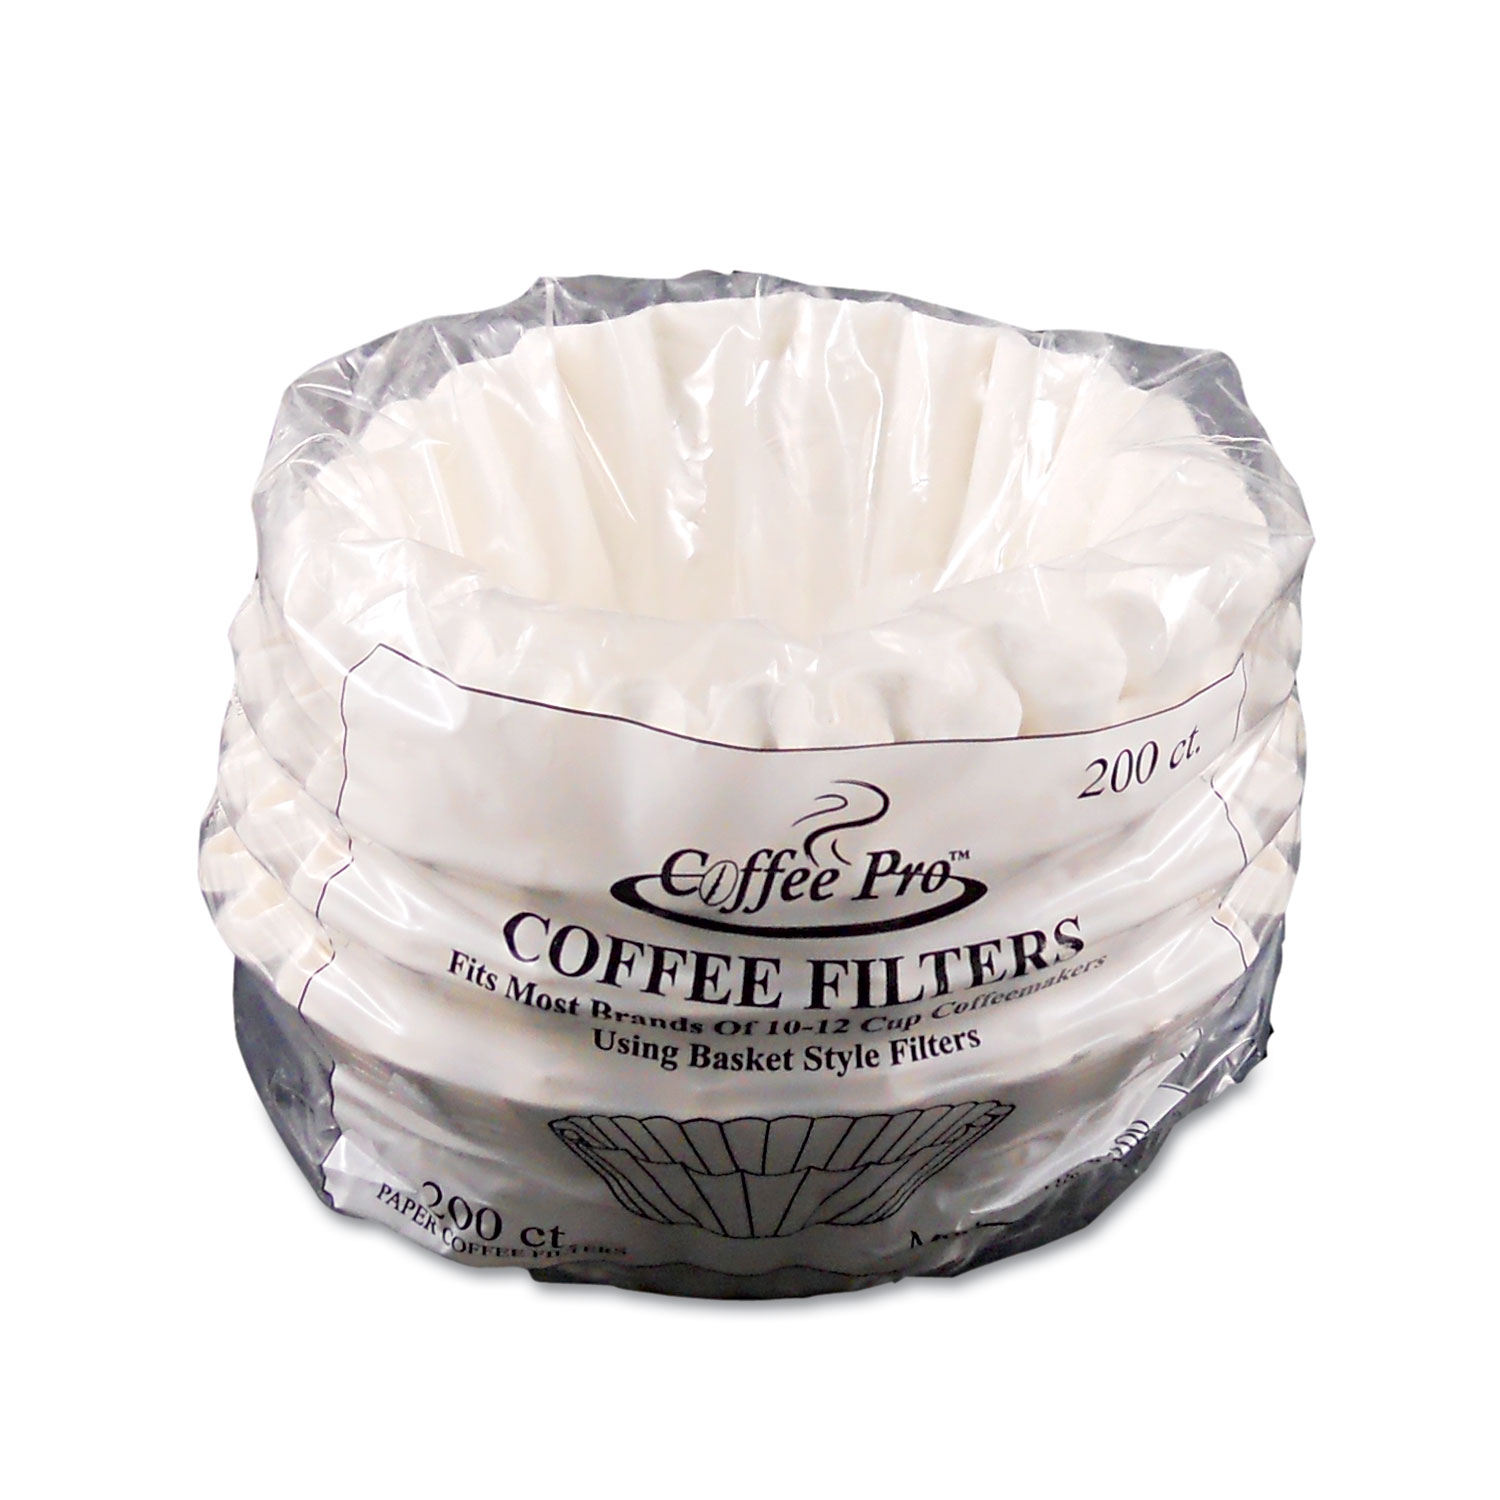  Coffee Pro CPF200 Basket Filters for Drip Coffeemakers, 10 to 12-Cups, White, 200 Filters/Pack (OGFCPF200) 